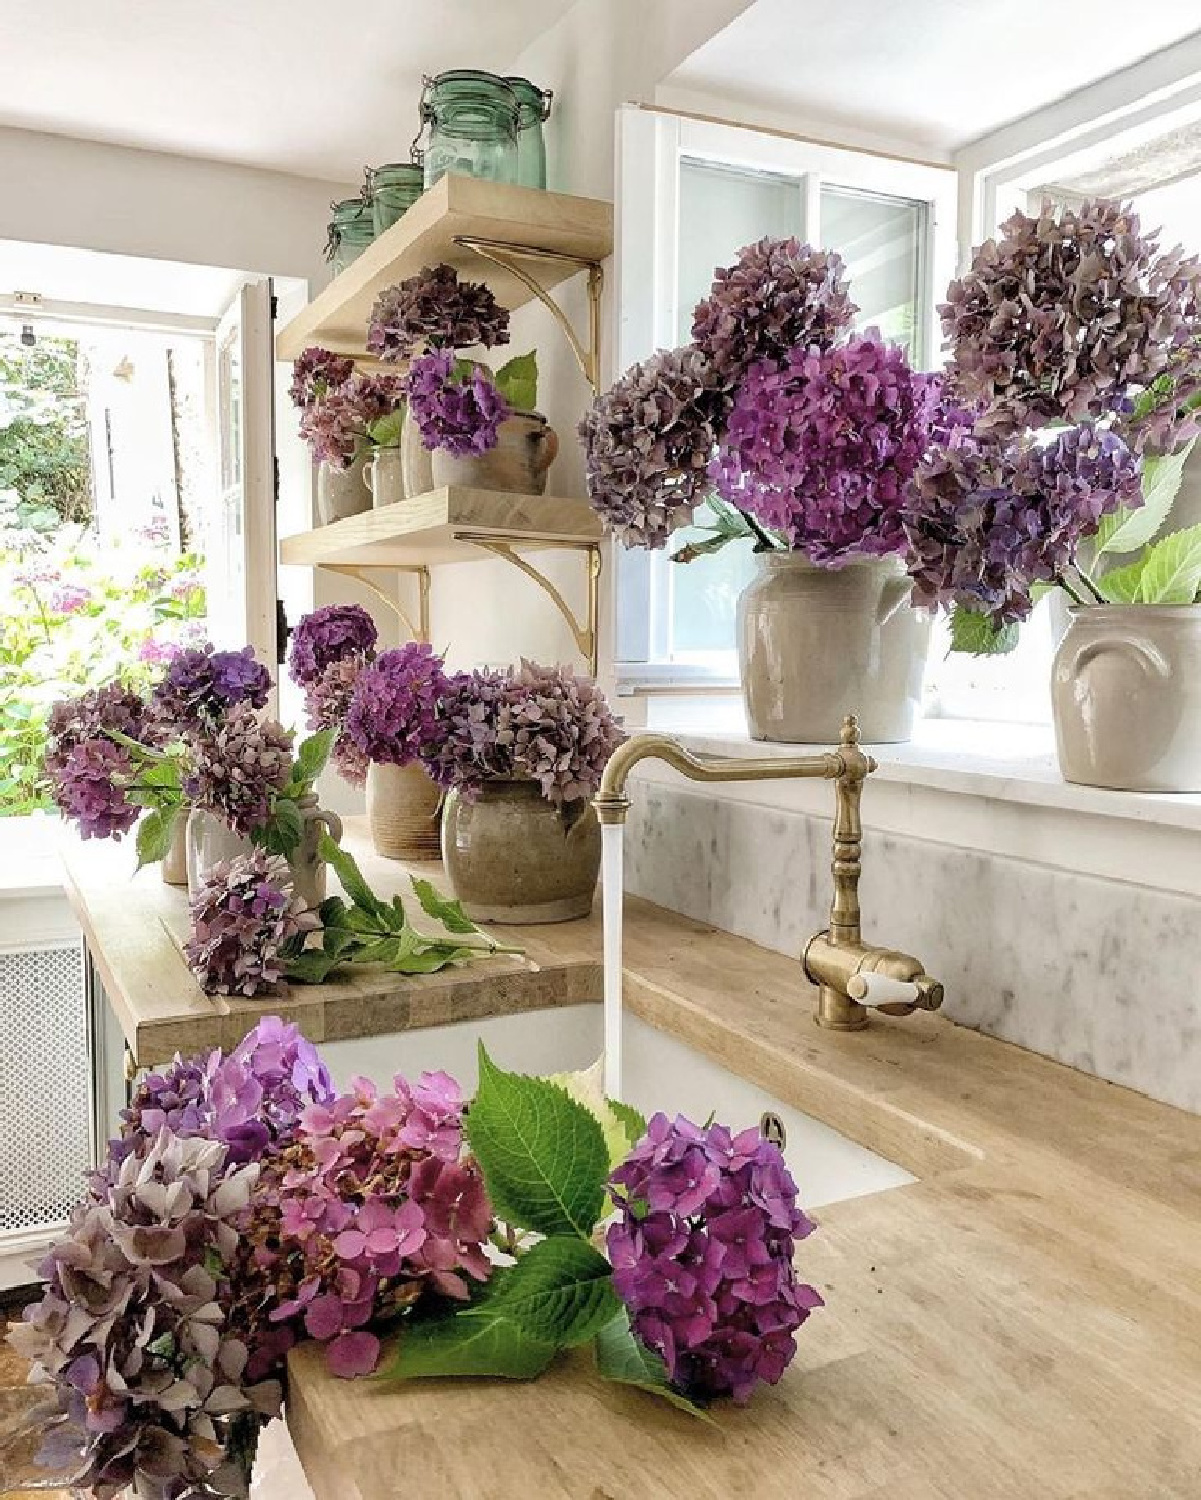 Lovely end of summer purple hydrangeas in a beautiful French farmhouse kitchen with wood countertops - Vivi et Margot. #frenchfarmhouse #frenchcountry #hydrangea #frenchkitchen #countrykitchens #woodcountertop #kitcheninfrance